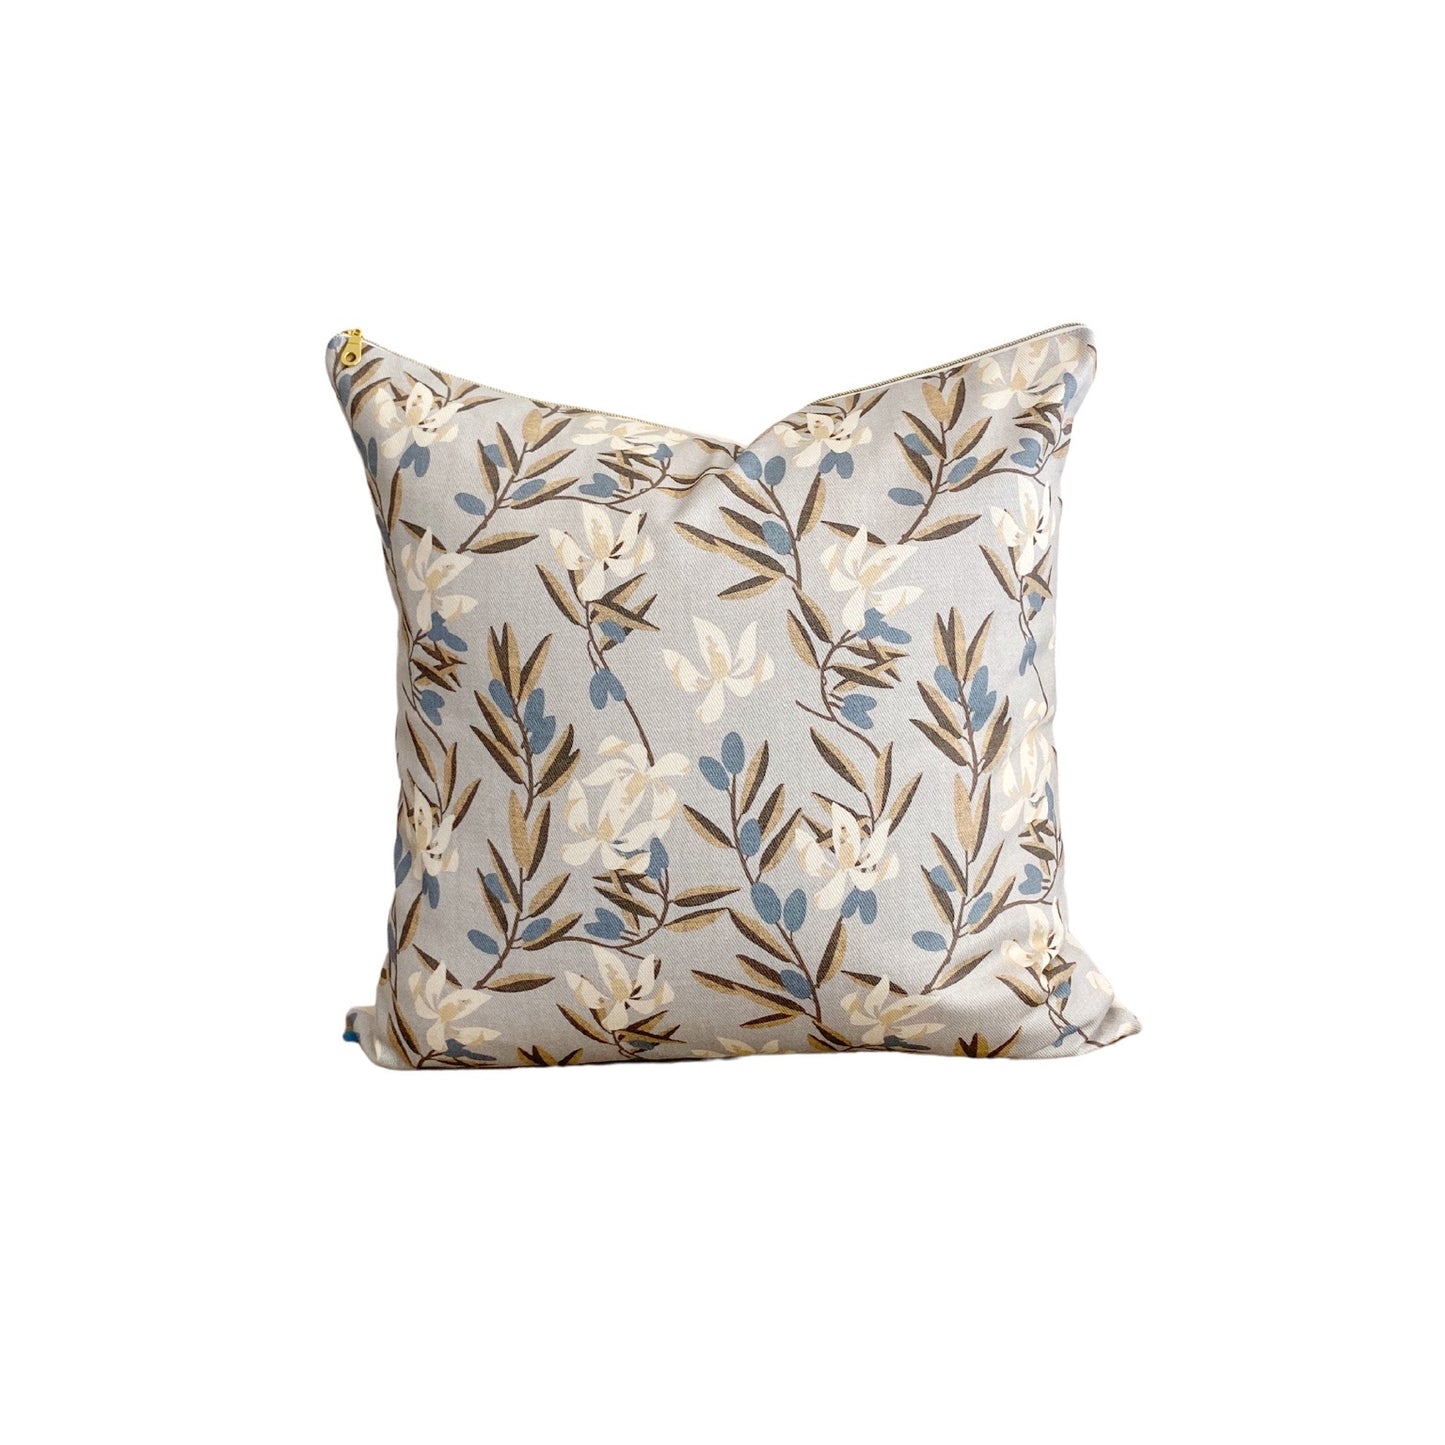 Olive Bloom Pillow Cover - Designed by Holli Zollinger